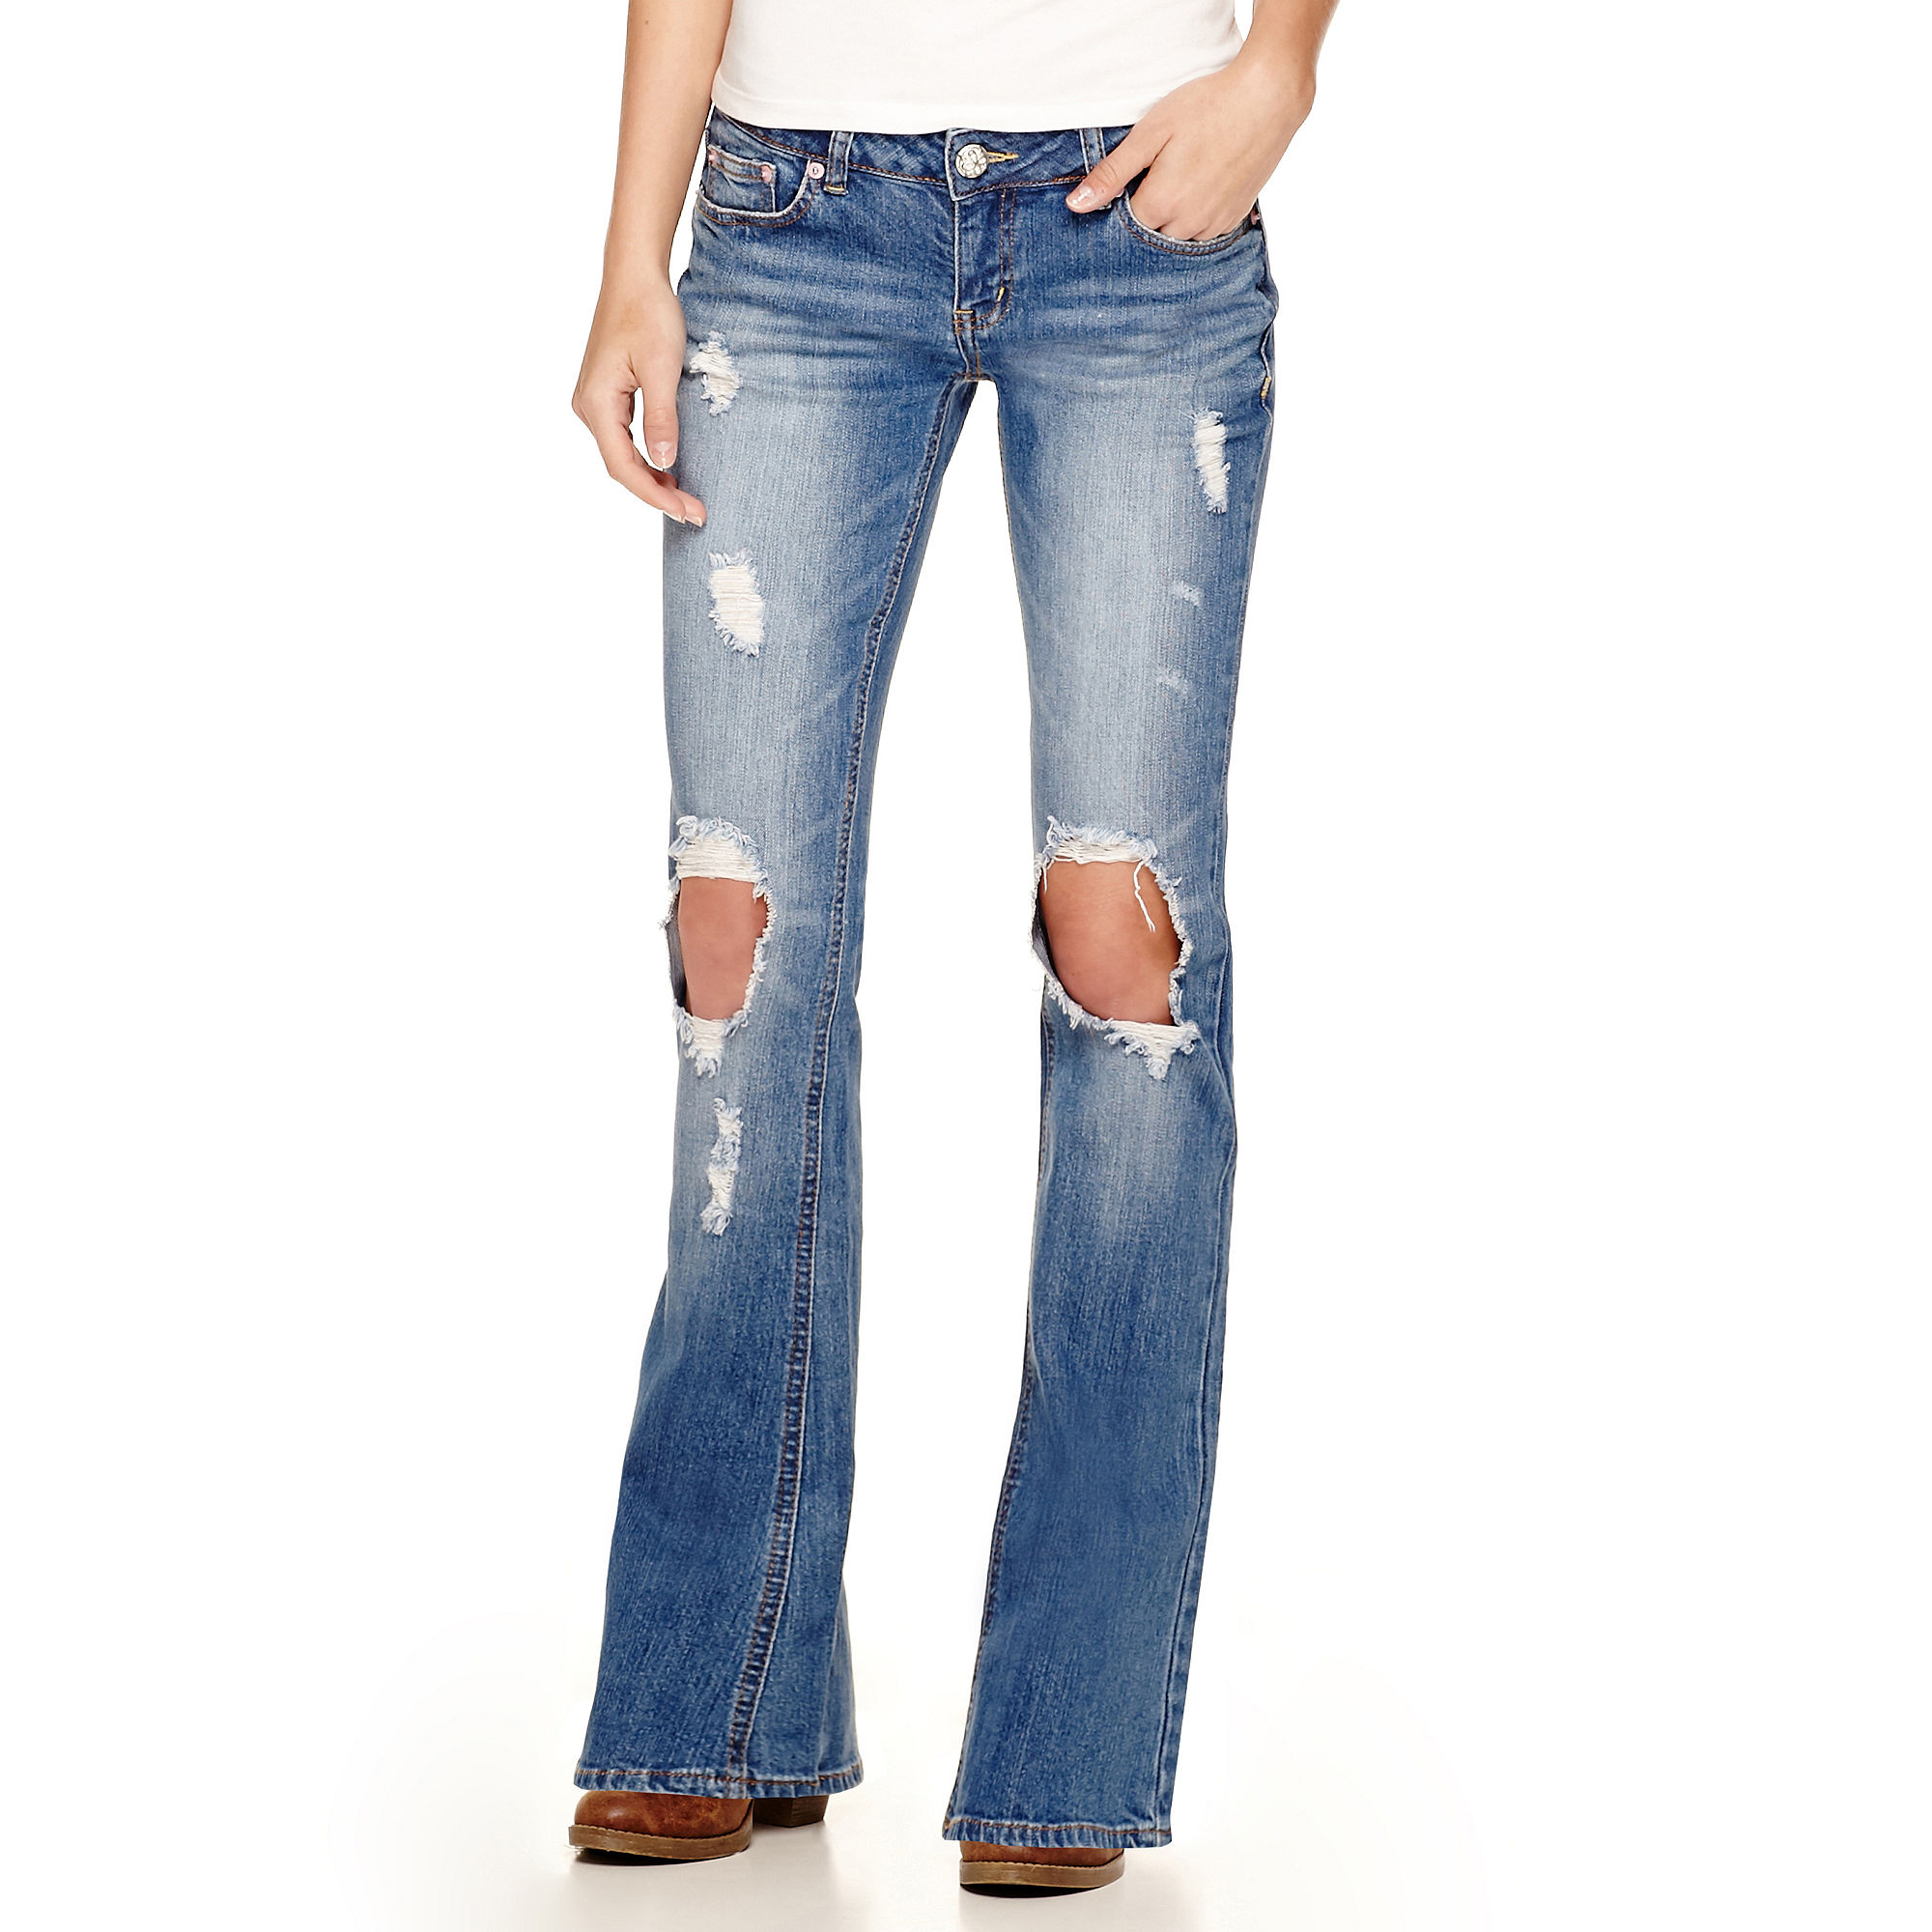 UPC 756575041107 product image for UNIONBAY Destructed Flared Jeans | upcitemdb.com